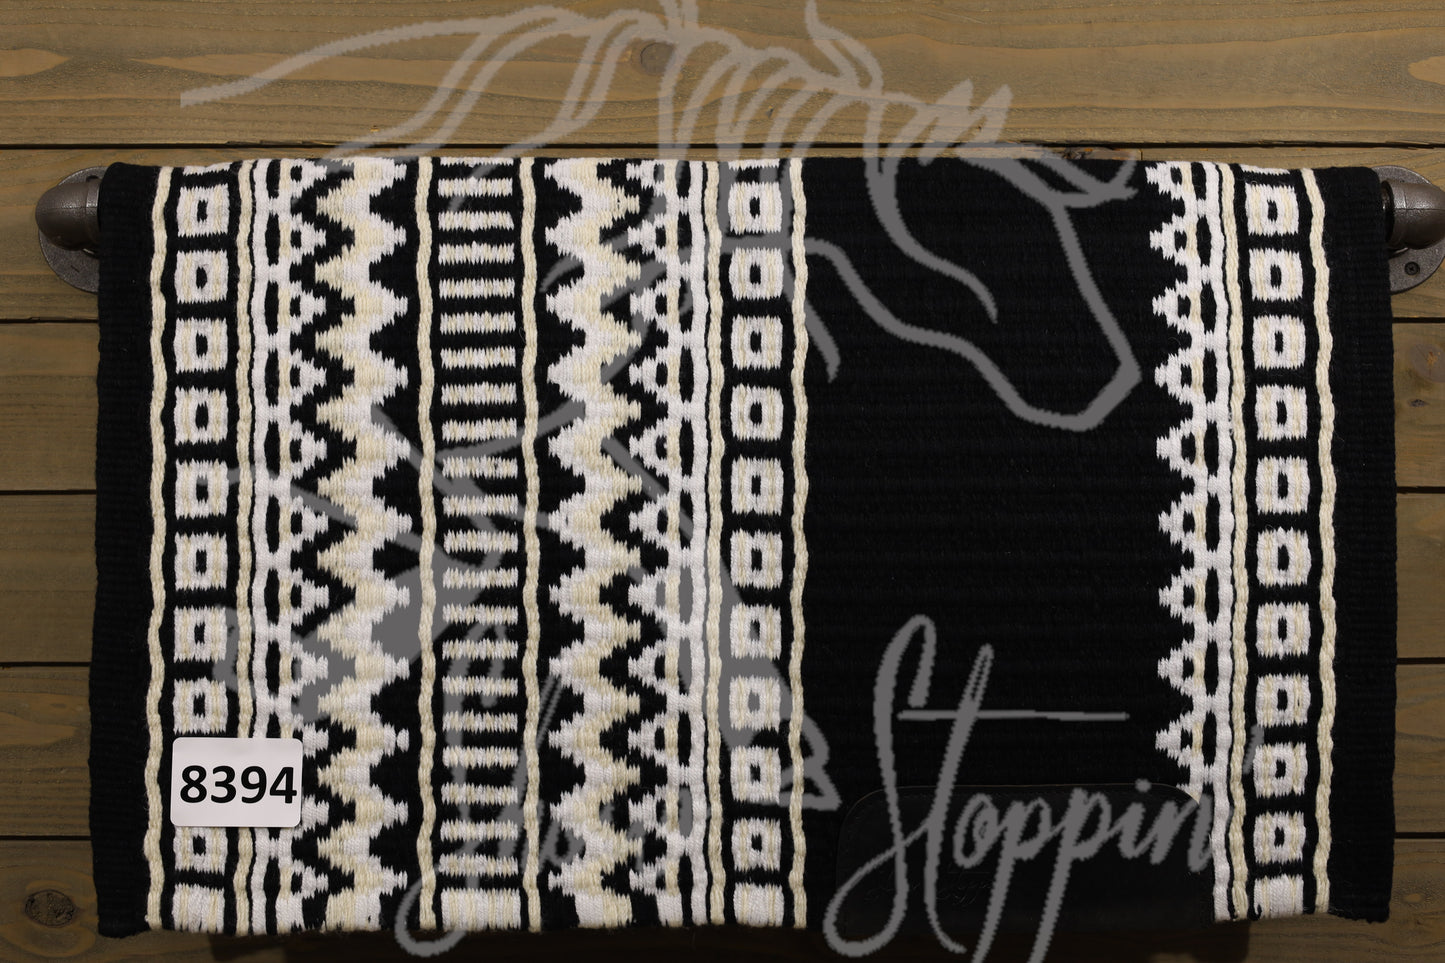 Show Stoppin | Show Blanket | 8394